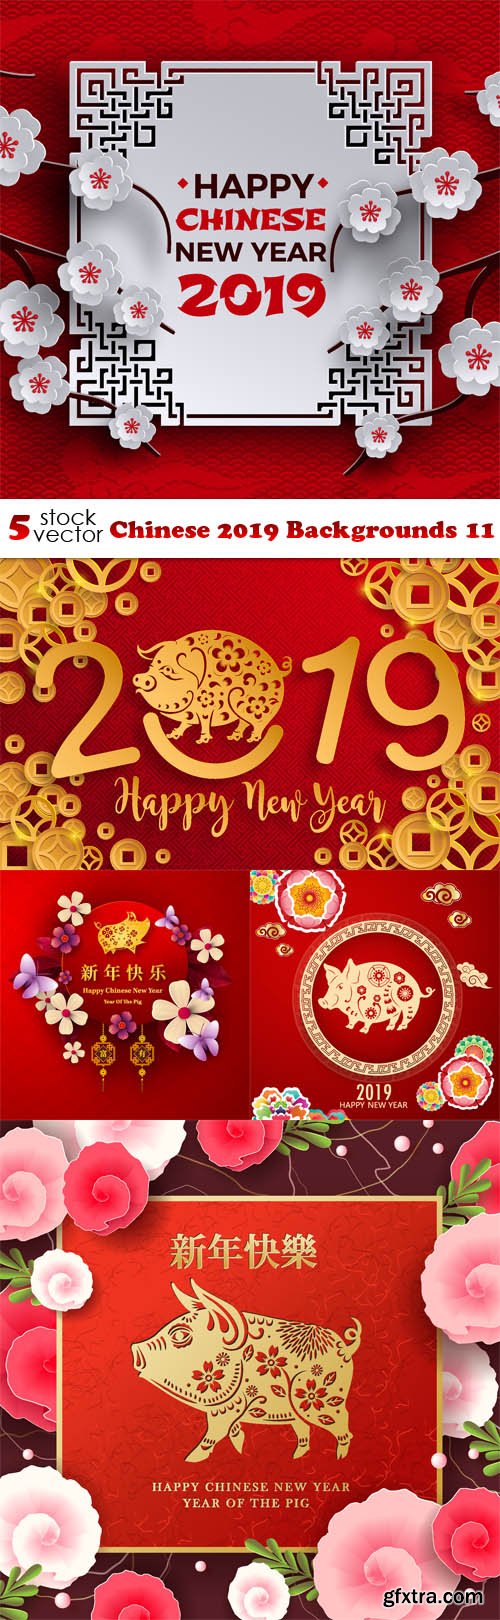 Vectors - Chinese 2019 Backgrounds 11